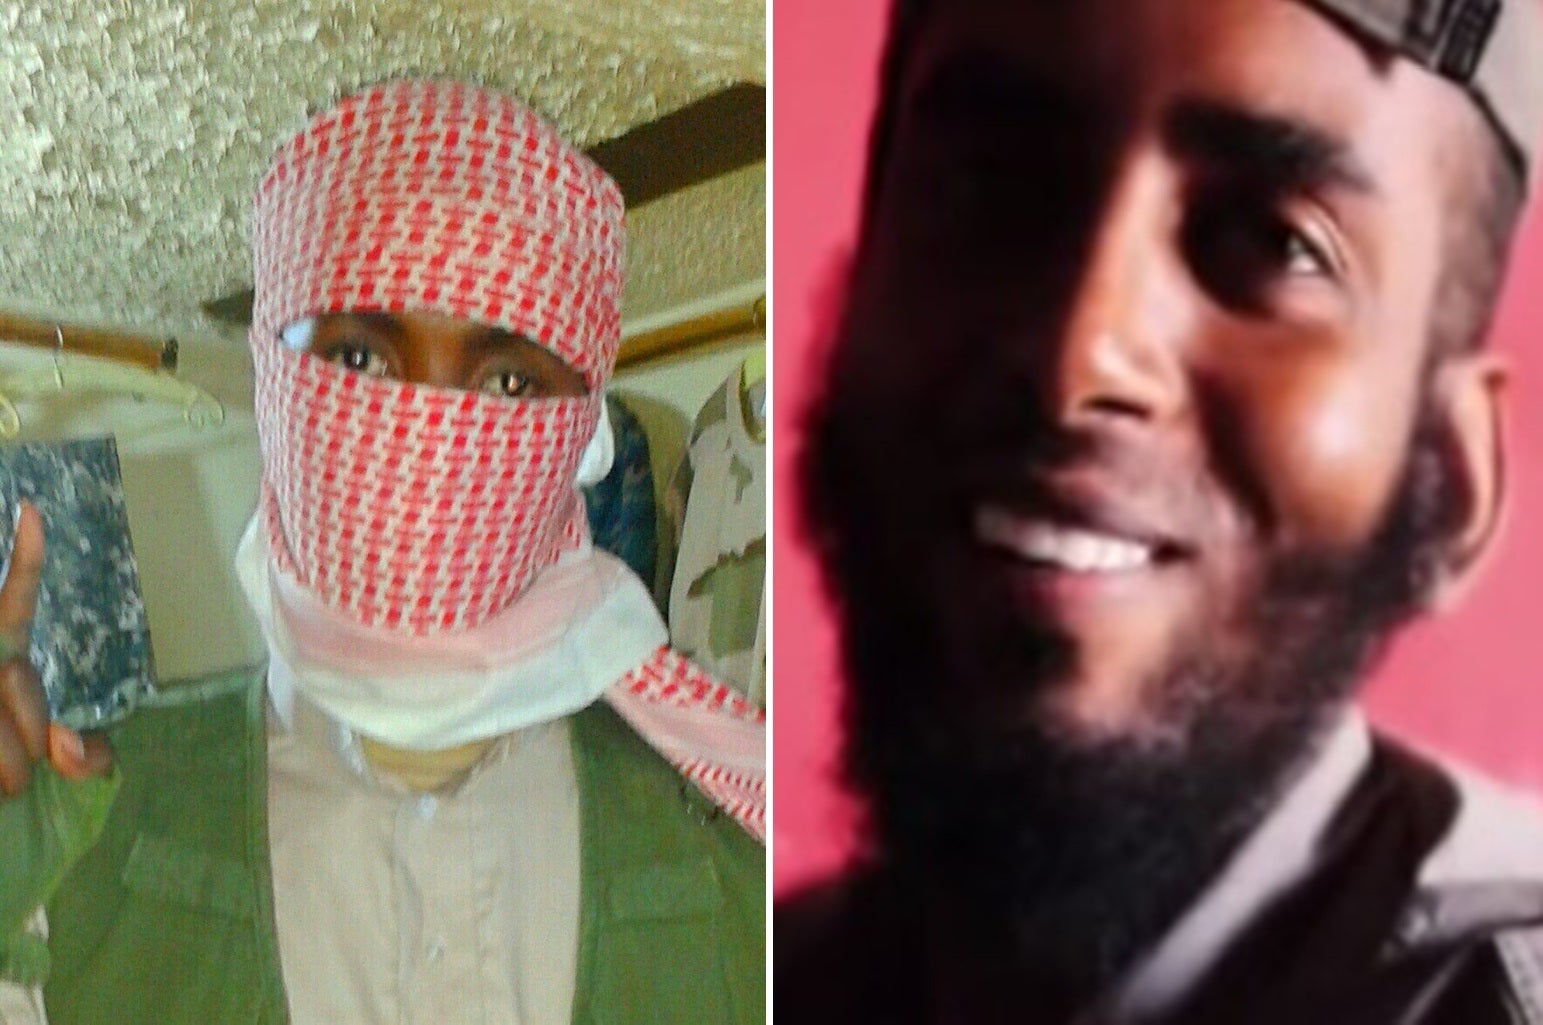 Abu Dharda and Abu Abdullah al-Habashi are believed to have been killed in Syria by US air strikes this month